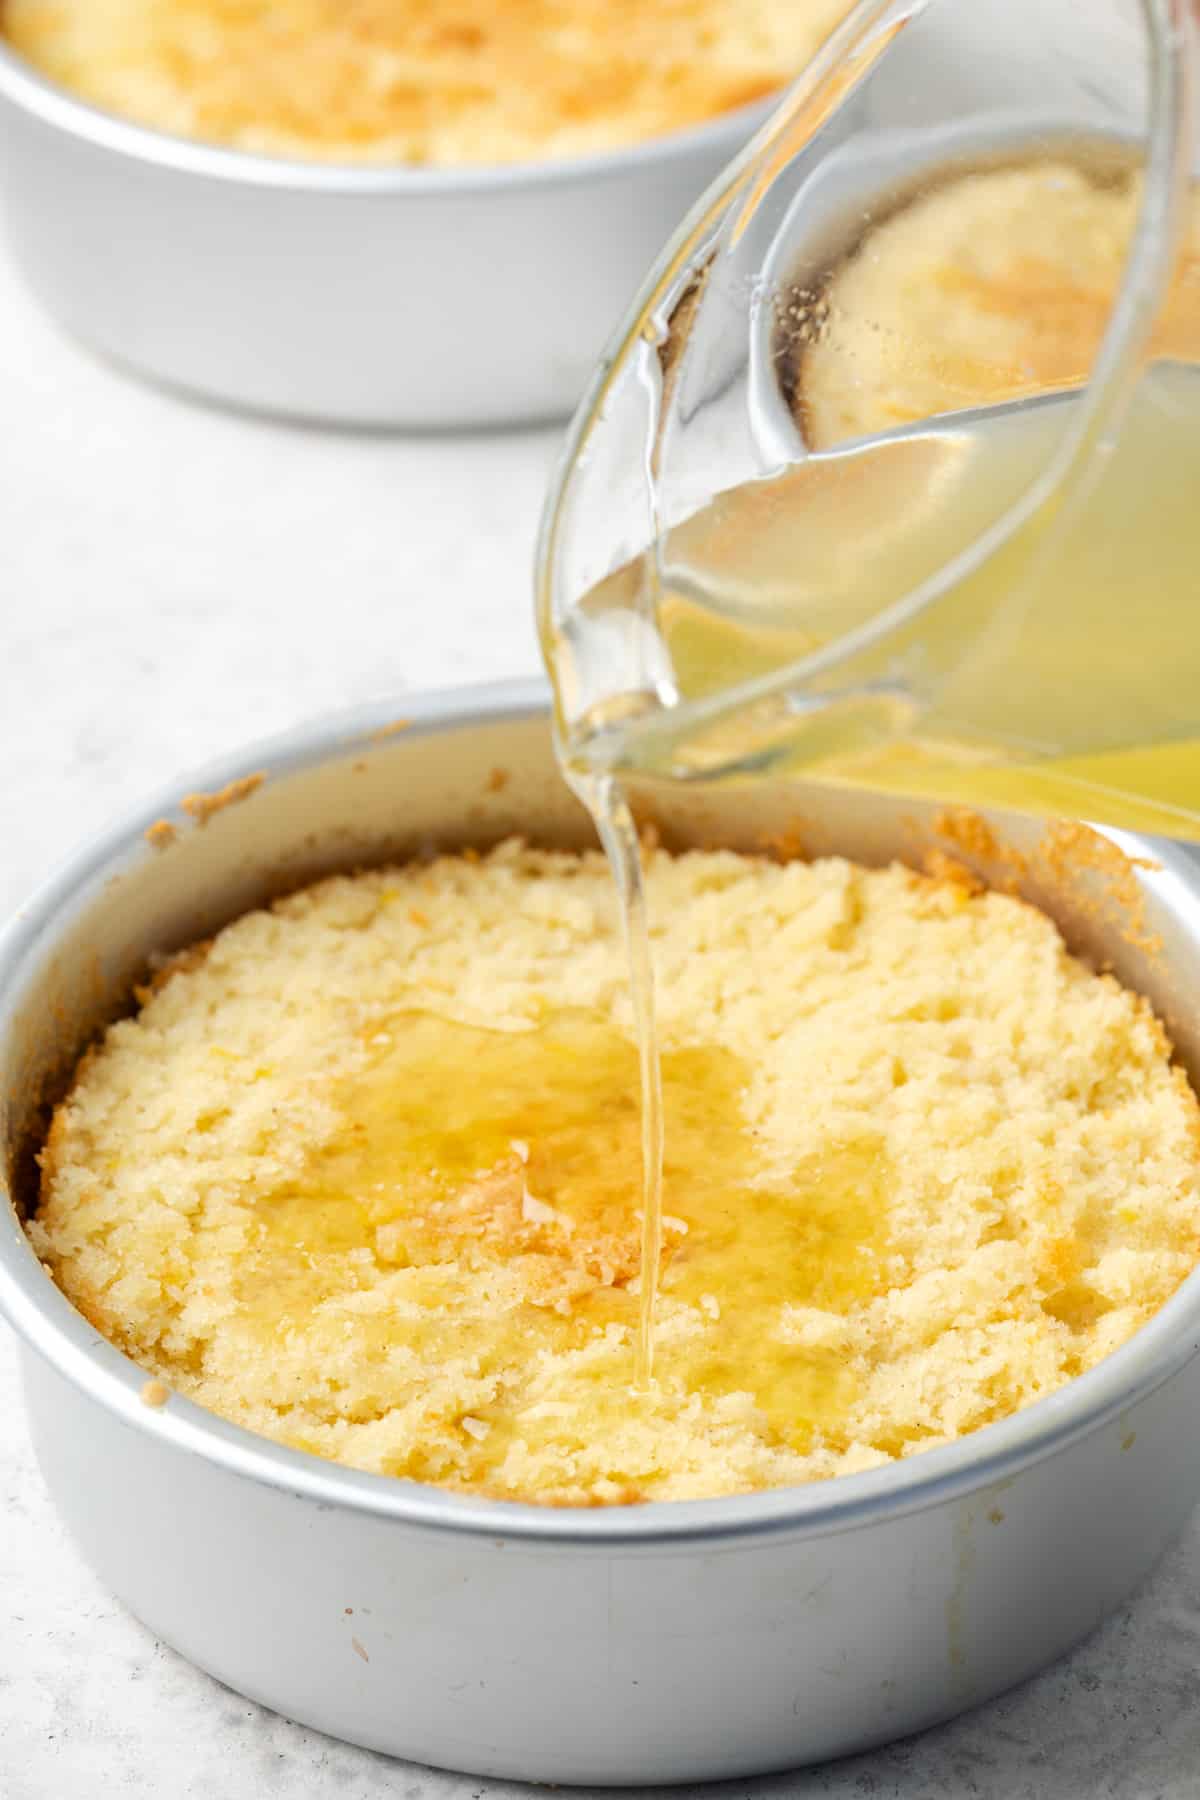 Lemon syrup being poured over a layer of gluten free lemon cake inside of a cake pan.